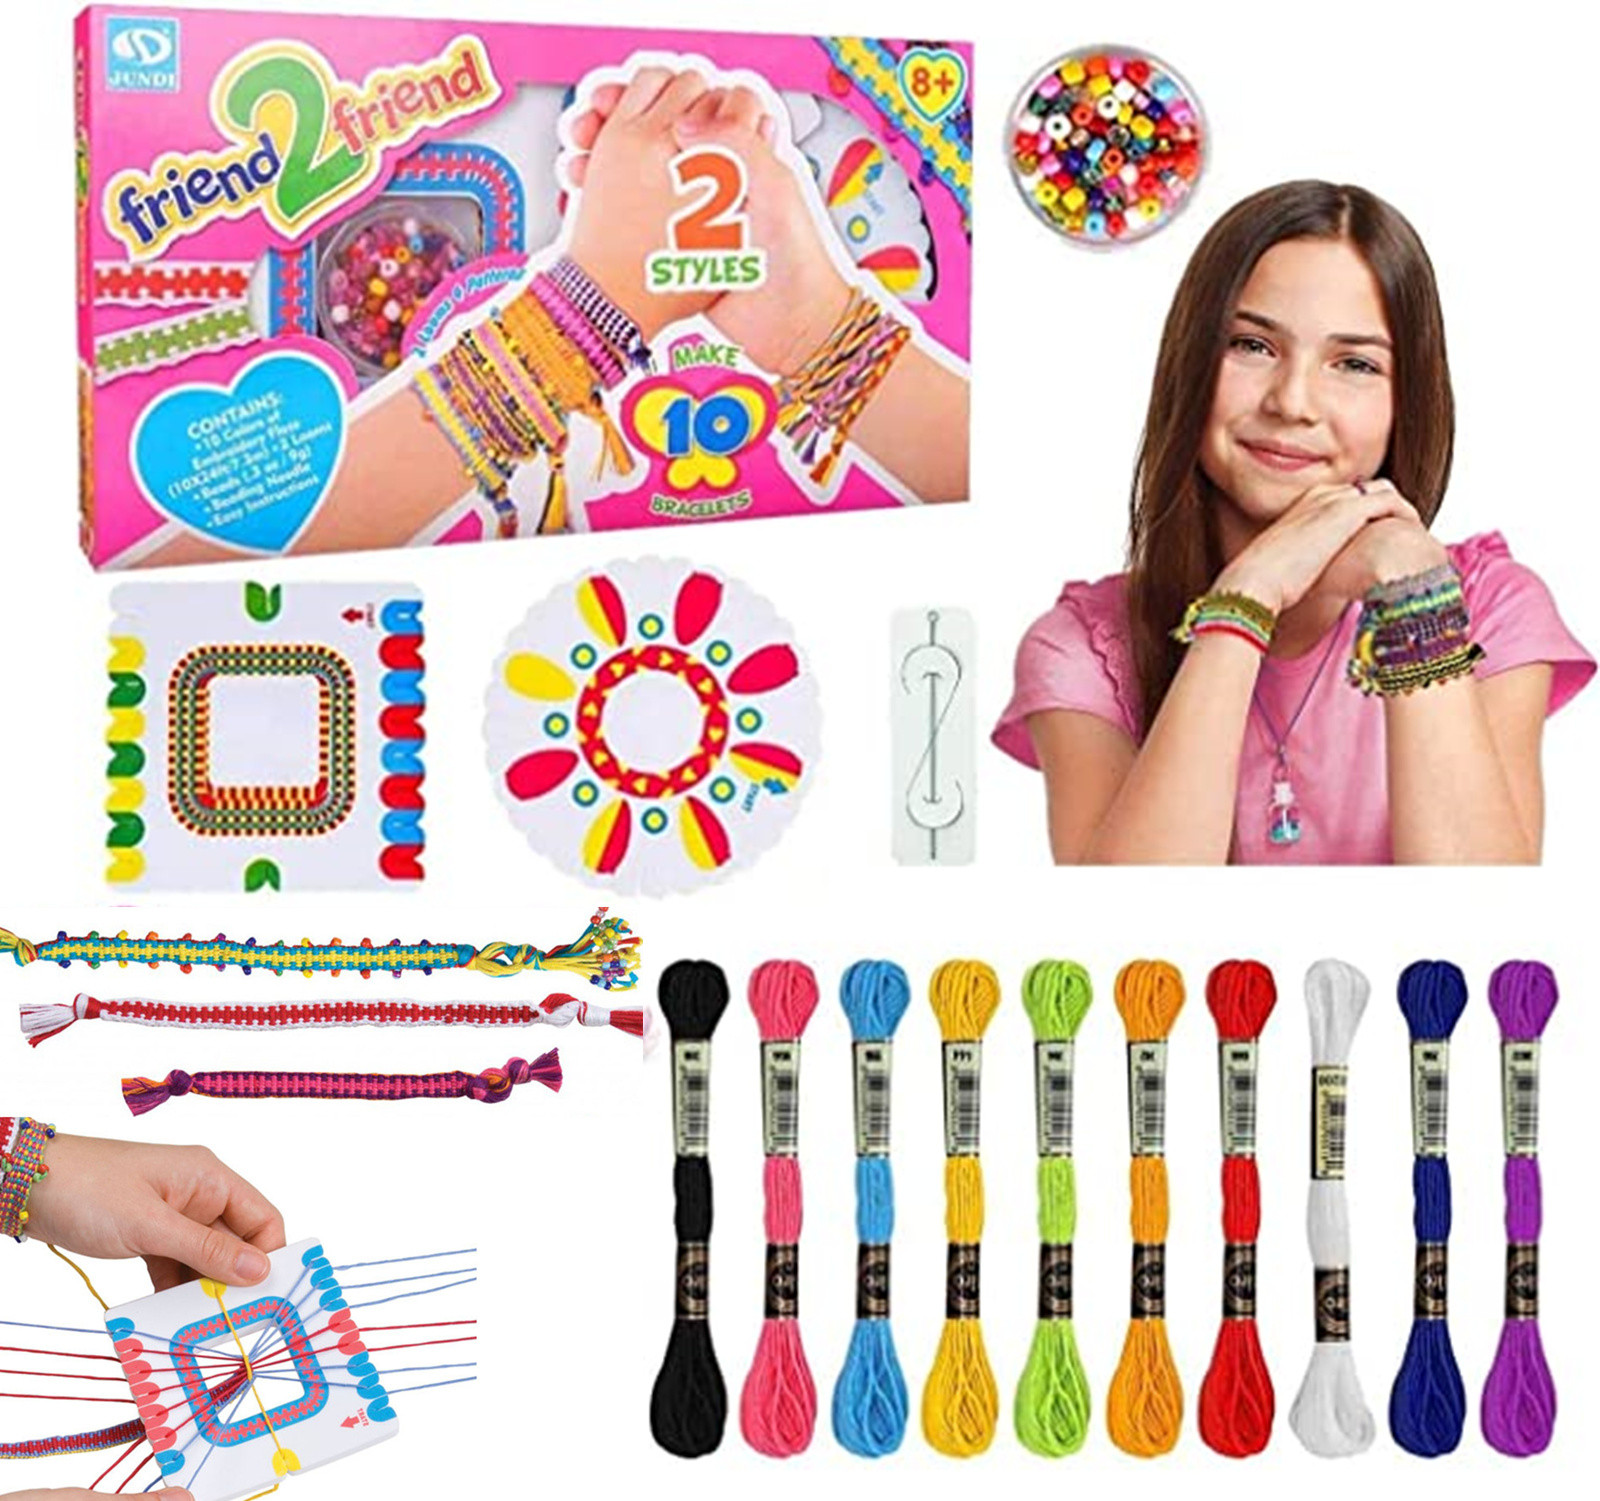 Kayannuo Clearance Friendship Bracelet Making Kit for 5-12 Year Old Girls, Arts and Crafts for Kids - Christmas or Birthday Gift, Girl's, Size: 1XL